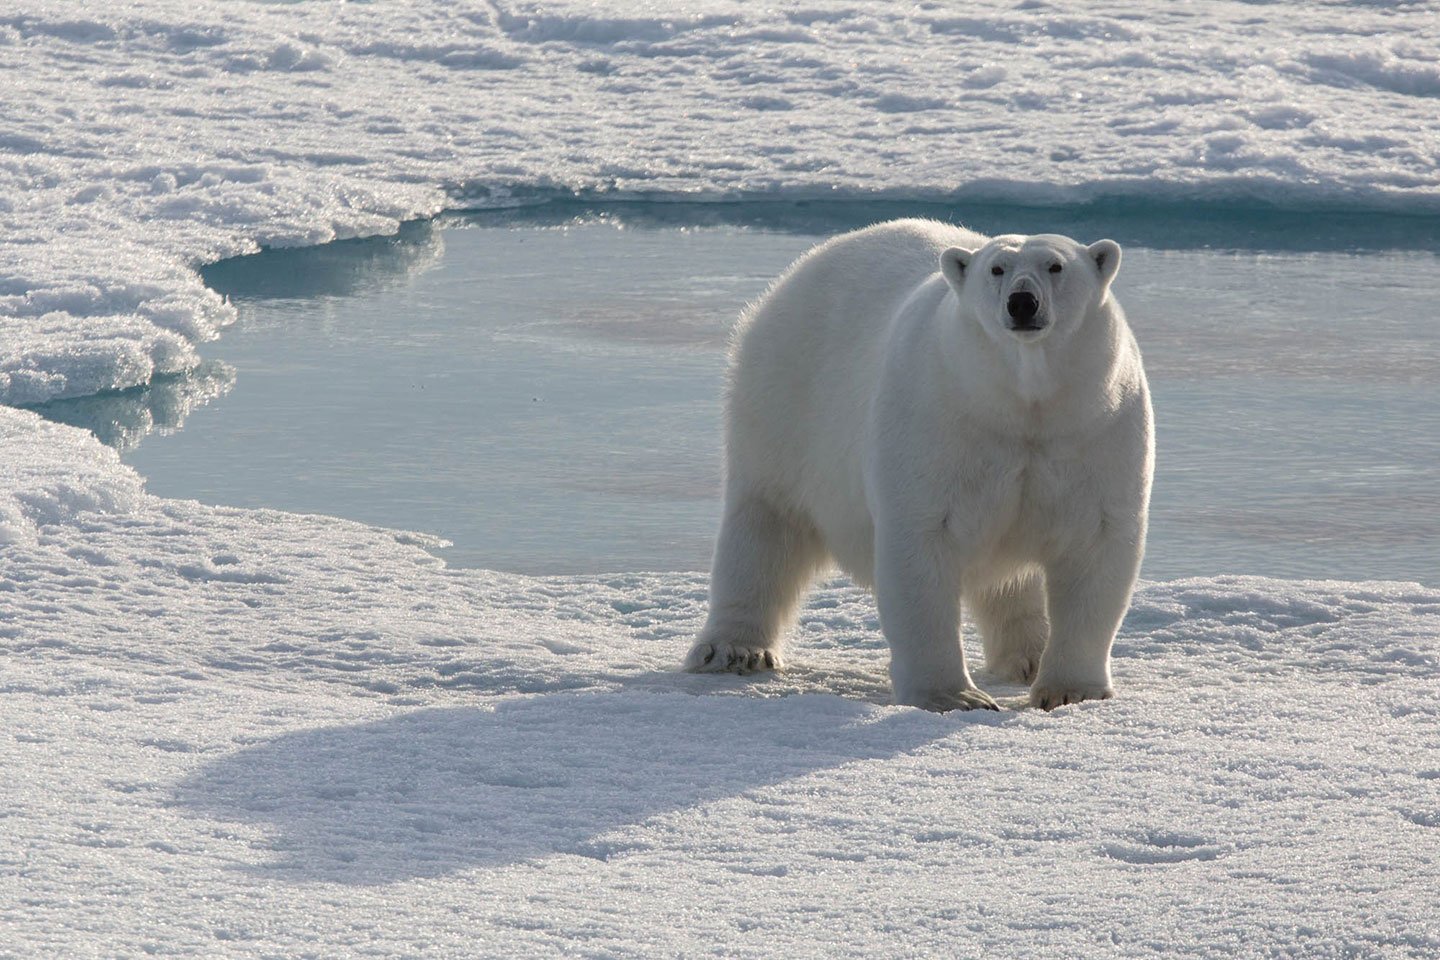 Polar bear sightings lure many wildlife enthusiasts to Arctic regions such as Greenland.